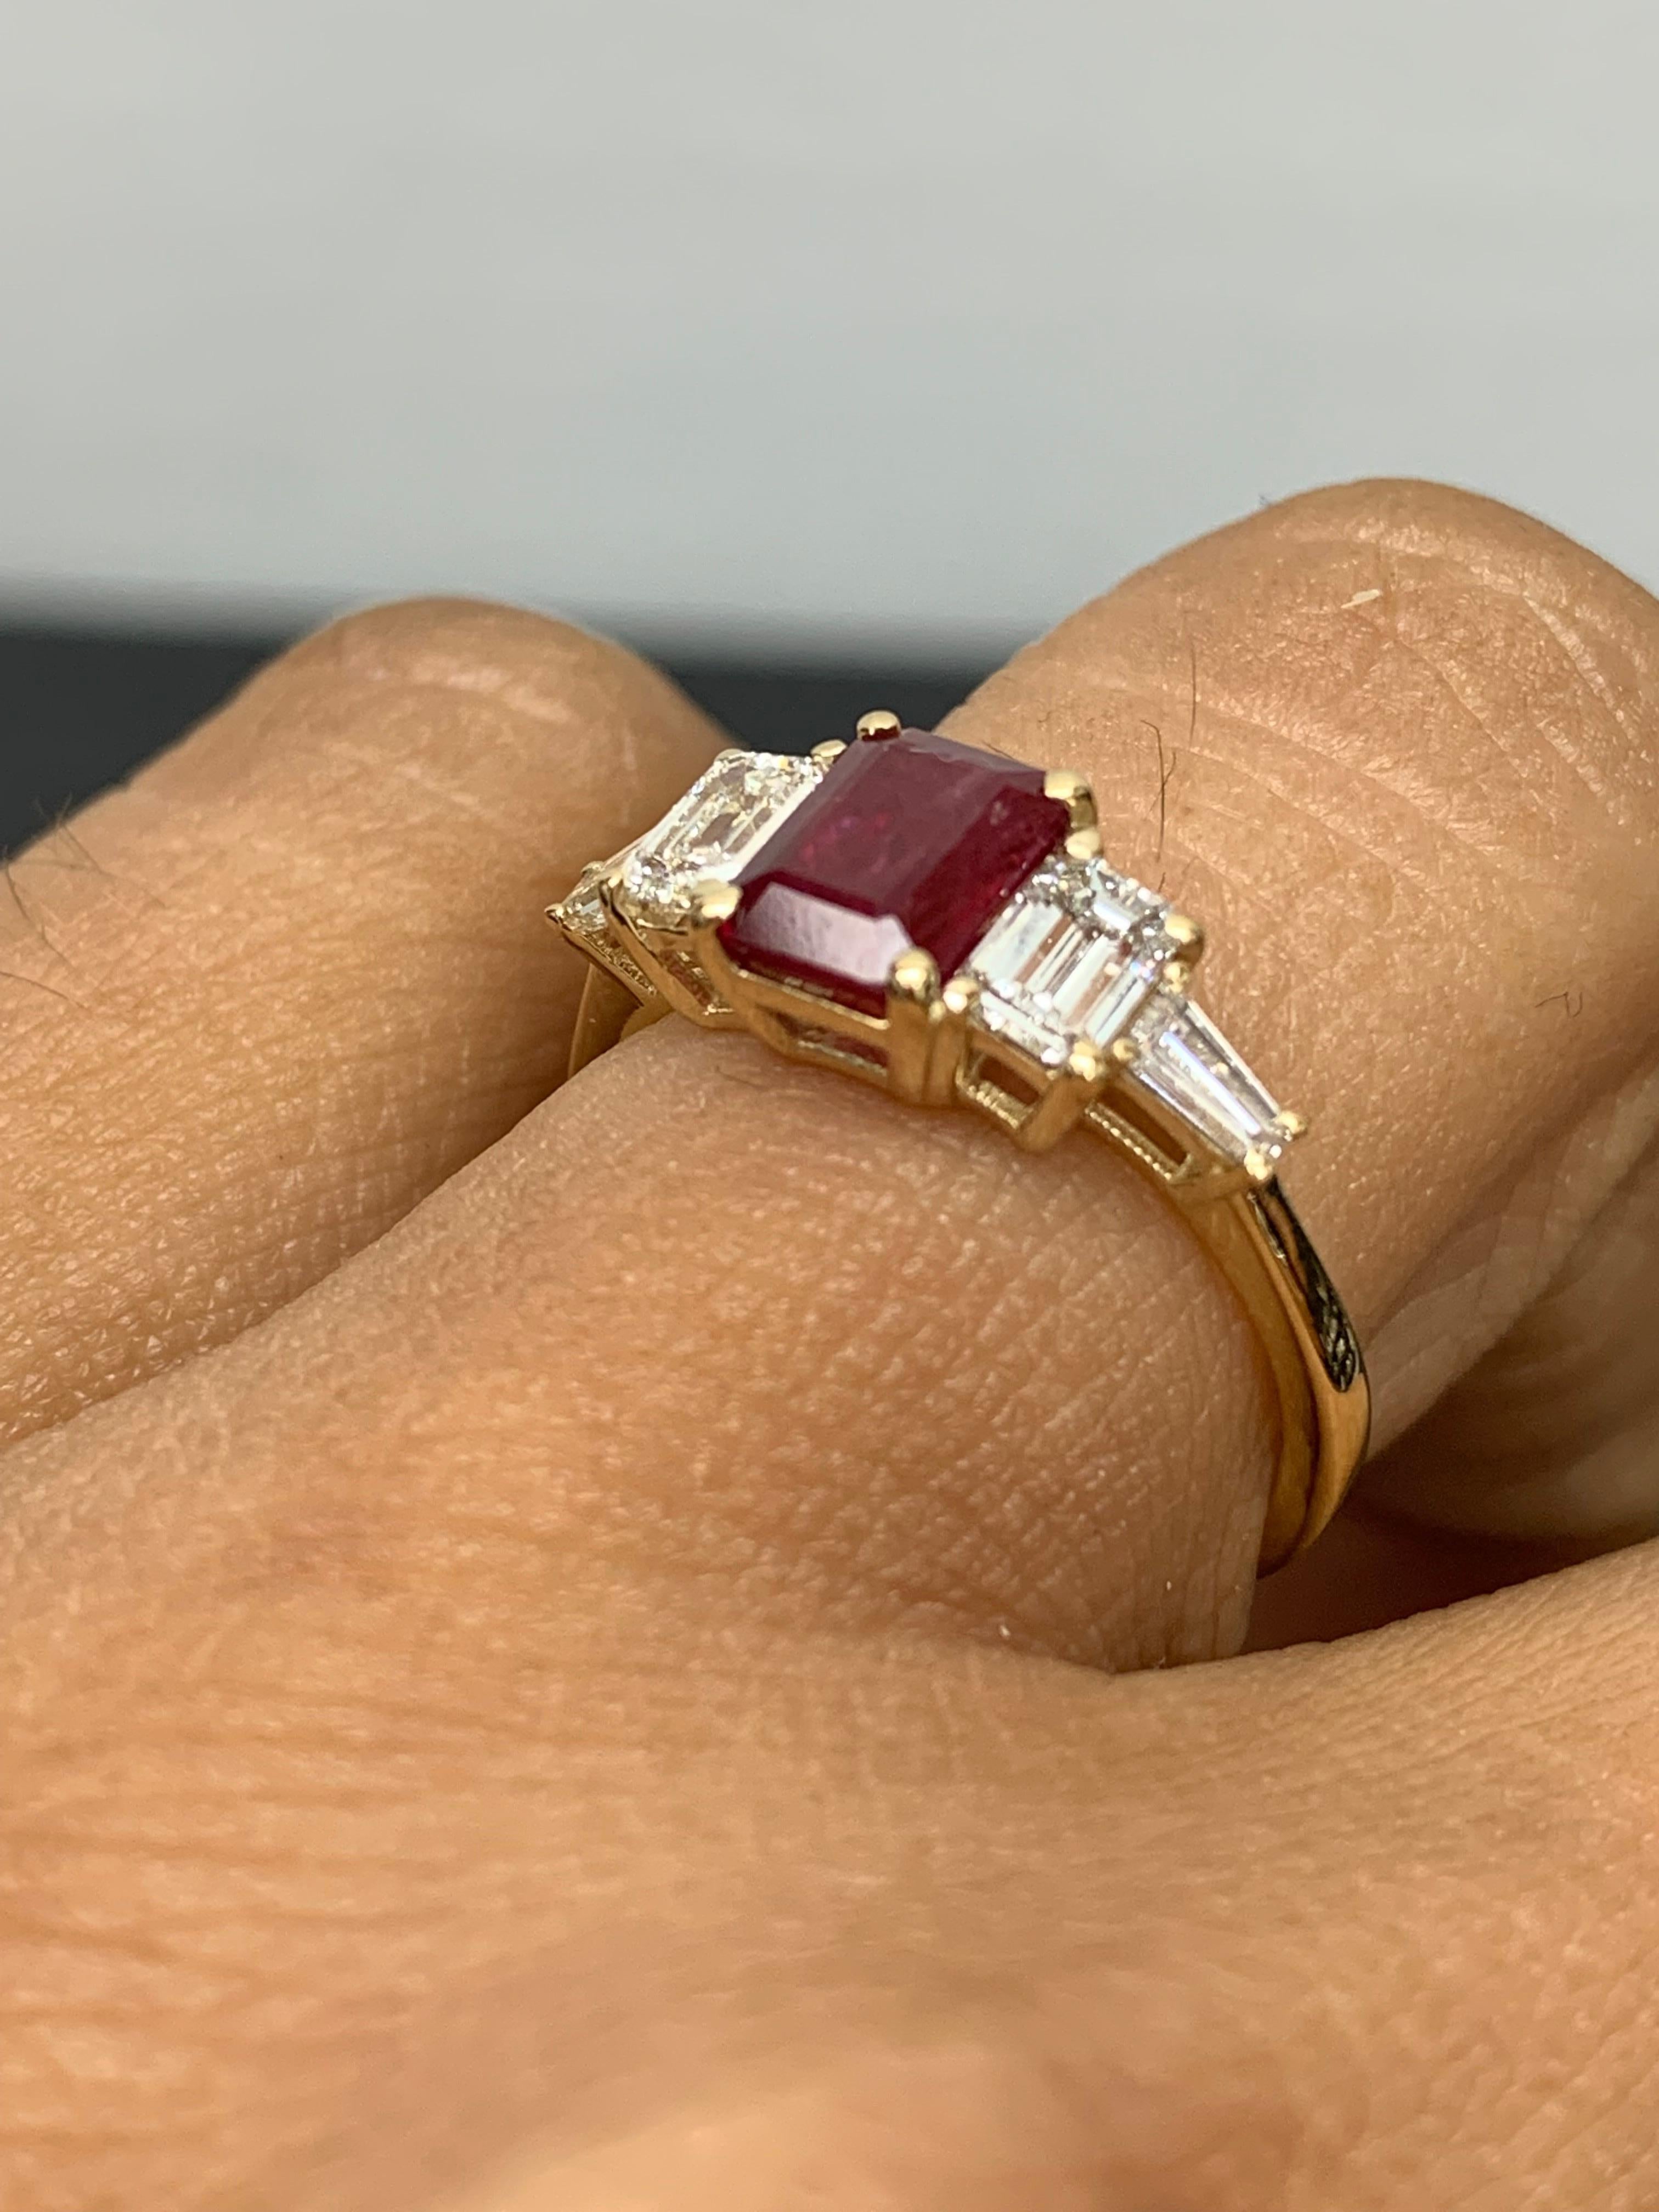 A stunning ring showcasing a rich intense emerald cut vivid red ruby weighing 1.04 carats.  Flanking the center stone are two emerald-cut diamonds weighing 0.64 carats and two baguette diamonds on each side weighing 0.21 carats in total, Made in 14K